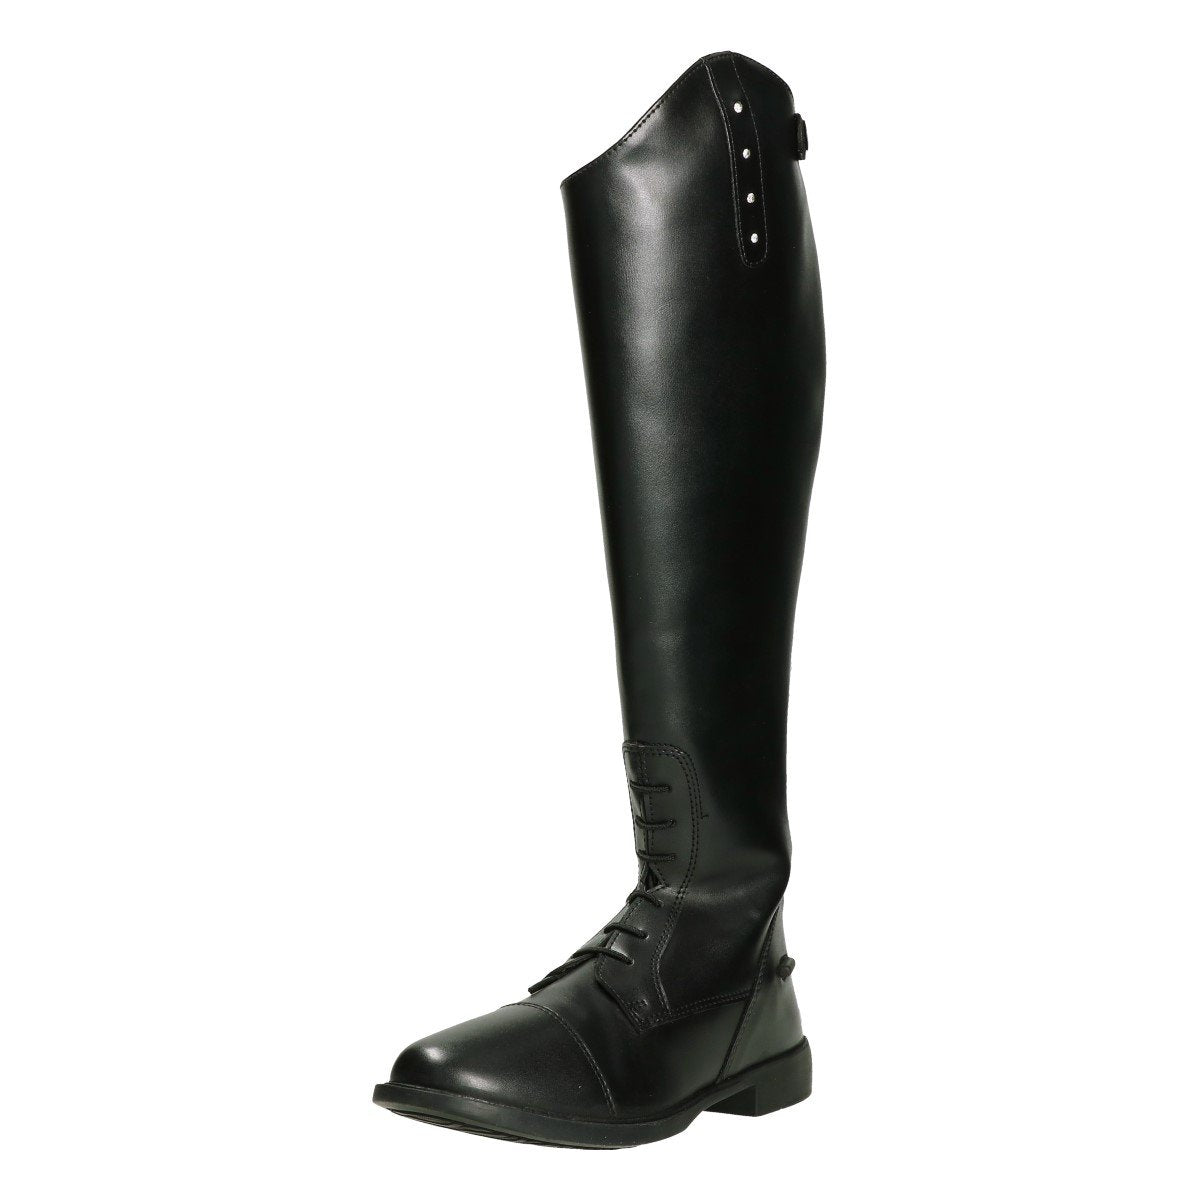 HORKA EMY RIDING BOOT